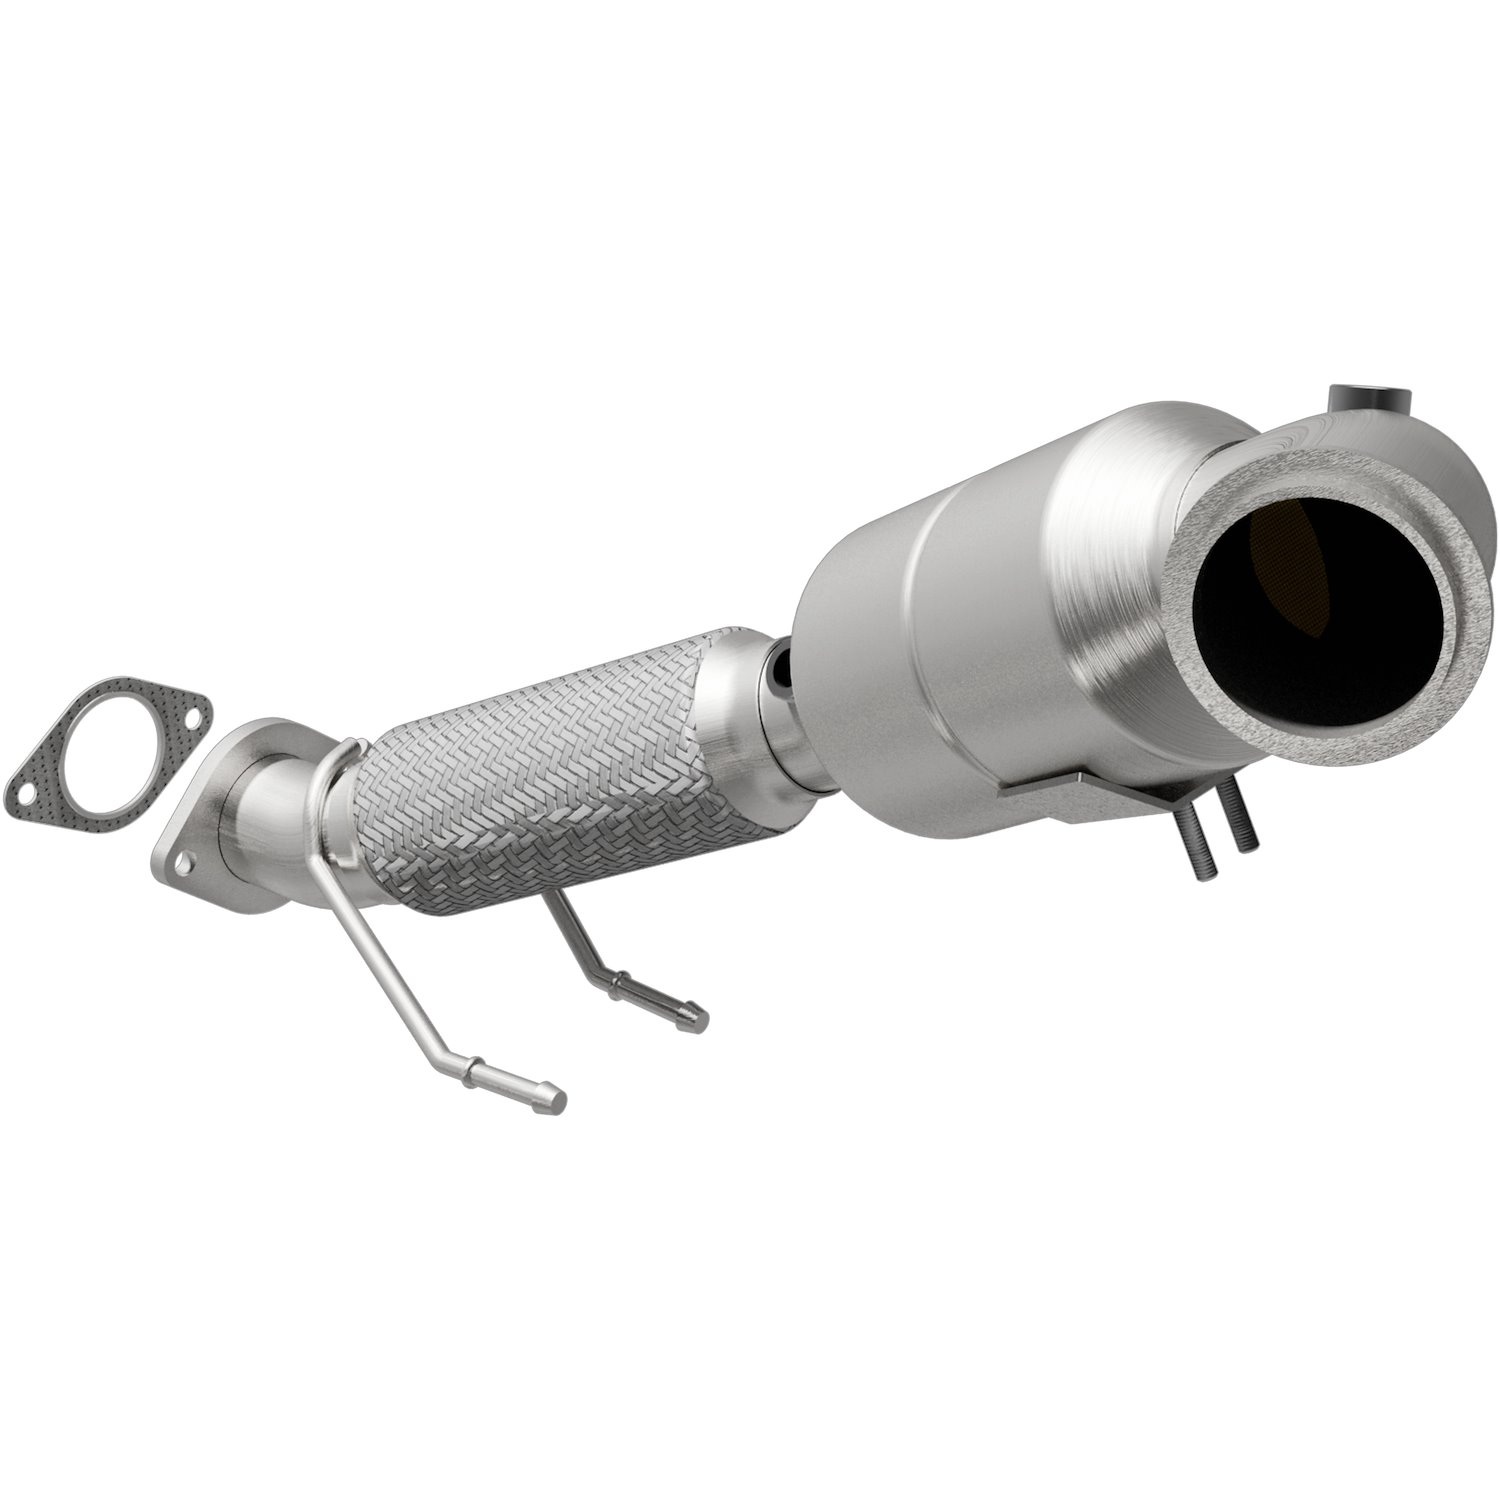 2013-2016 Ford Escape OEM Grade Federal / EPA Compliant Direct-Fit Catalytic Converter